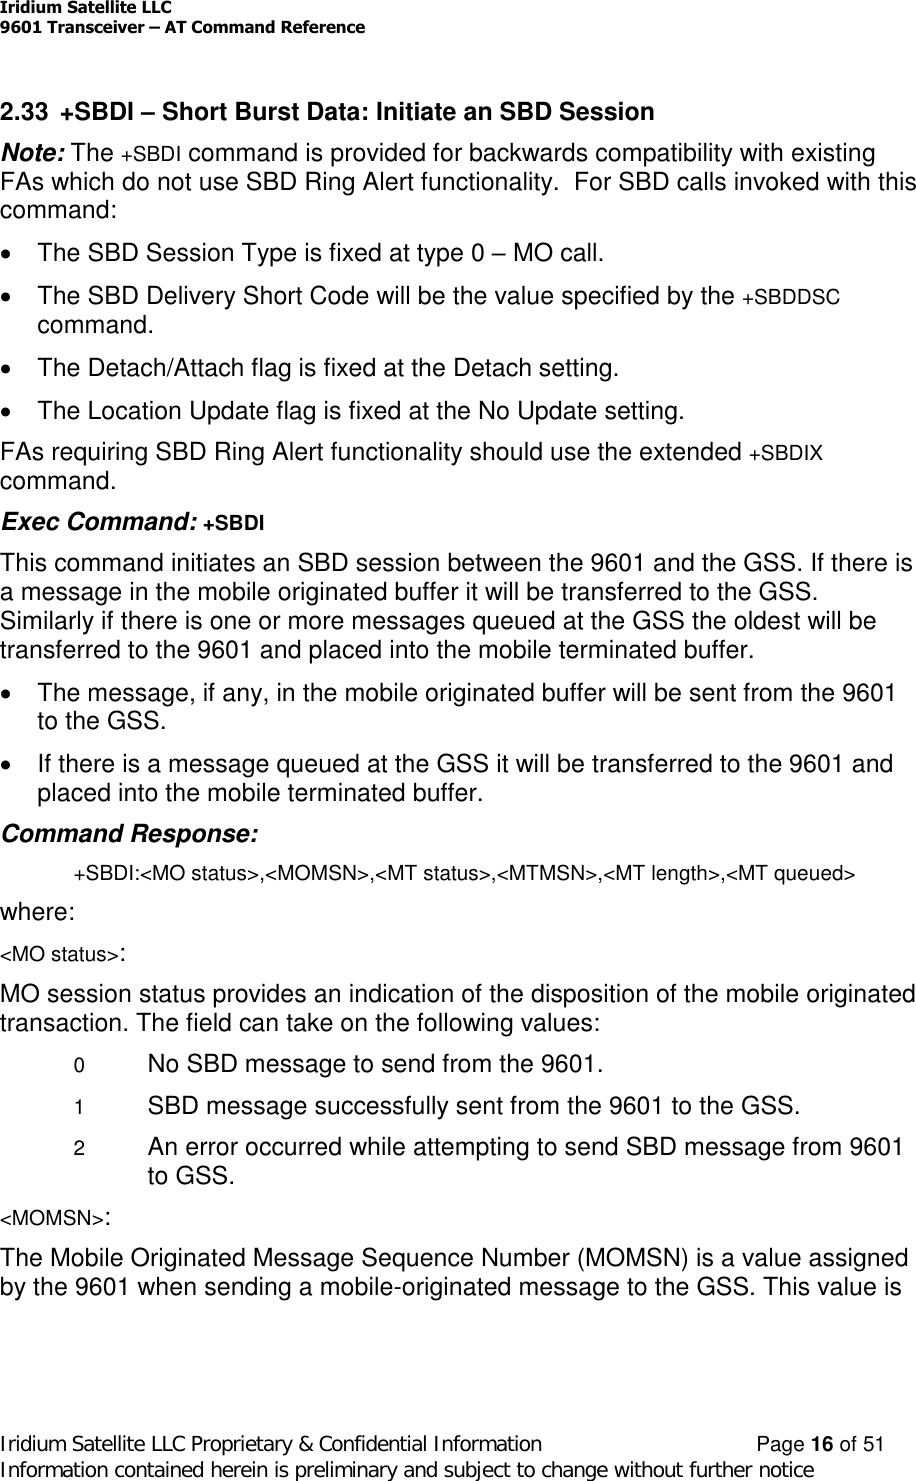 Iridium Satellite LLC9601 Transceiver –AT Command ReferenceIridium Satellite LLC Proprietary &amp; Confidential Information Page 16 of 51Information contained herein is preliminary and subject to change without further notice2.33 +SBDI –Short Burst Data: Initiate an SBD SessionNote: The +SBDI command is provided for backwards compatibility with existingFAs which do not use SBD Ring Alert functionality. For SBD calls invoked with thiscommand:The SBD Session Type is fixed at type 0 –MO call.The SBD Delivery Short Code will be the value specified by the +SBDDSCcommand.The Detach/Attach flag is fixed at the Detach setting.The Location Update flag is fixed at the No Update setting.FAs requiring SBD Ring Alert functionality should use the extended +SBDIXcommand.Exec Command: +SBDIThis command initiates an SBD session between the 9601 and the GSS. If there isa message in the mobile originated buffer it will be transferred to the GSS.Similarly if there is one or more messages queued at the GSS the oldest will betransferred to the 9601 and placed into the mobile terminated buffer.The message, if any, in the mobile originated buffer will be sent from the 9601to the GSS.If there is a message queued at the GSS it will be transferred to the 9601 andplaced into the mobile terminated buffer.Command Response:+SBDI:&lt;MO status&gt;,&lt;MOMSN&gt;,&lt;MT status&gt;,&lt;MTMSN&gt;,&lt;MT length&gt;,&lt;MT queued&gt;where:&lt;MO status&gt;:MO session status provides an indication of the disposition of the mobile originatedtransaction. The field can take on the following values:0No SBD message to send from the 9601.1SBD message successfully sent from the 9601 to the GSS.2An error occurred while attempting to send SBD message from 9601to GSS.&lt;MOMSN&gt;:The Mobile Originated Message Sequence Number (MOMSN) is a value assignedby the 9601 when sending a mobile-originated message to the GSS. This value is